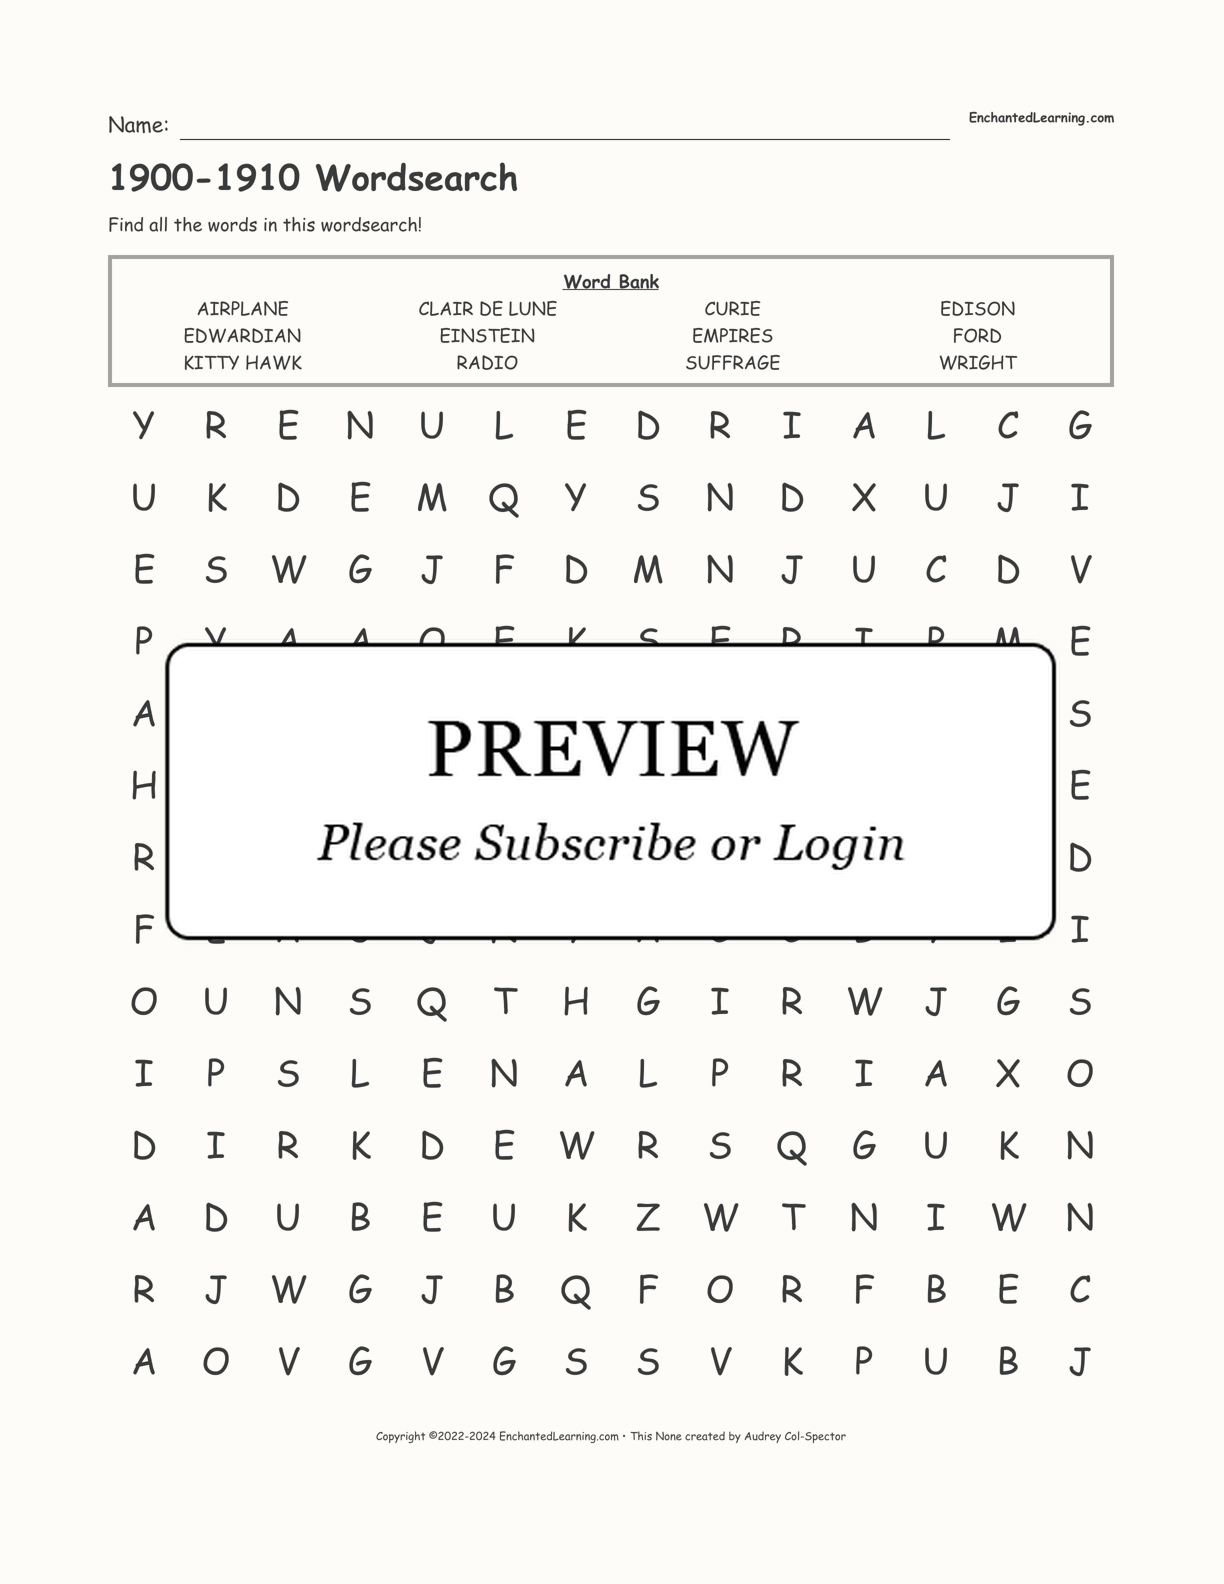 1900-1910 Wordsearch interactive worksheet page 1